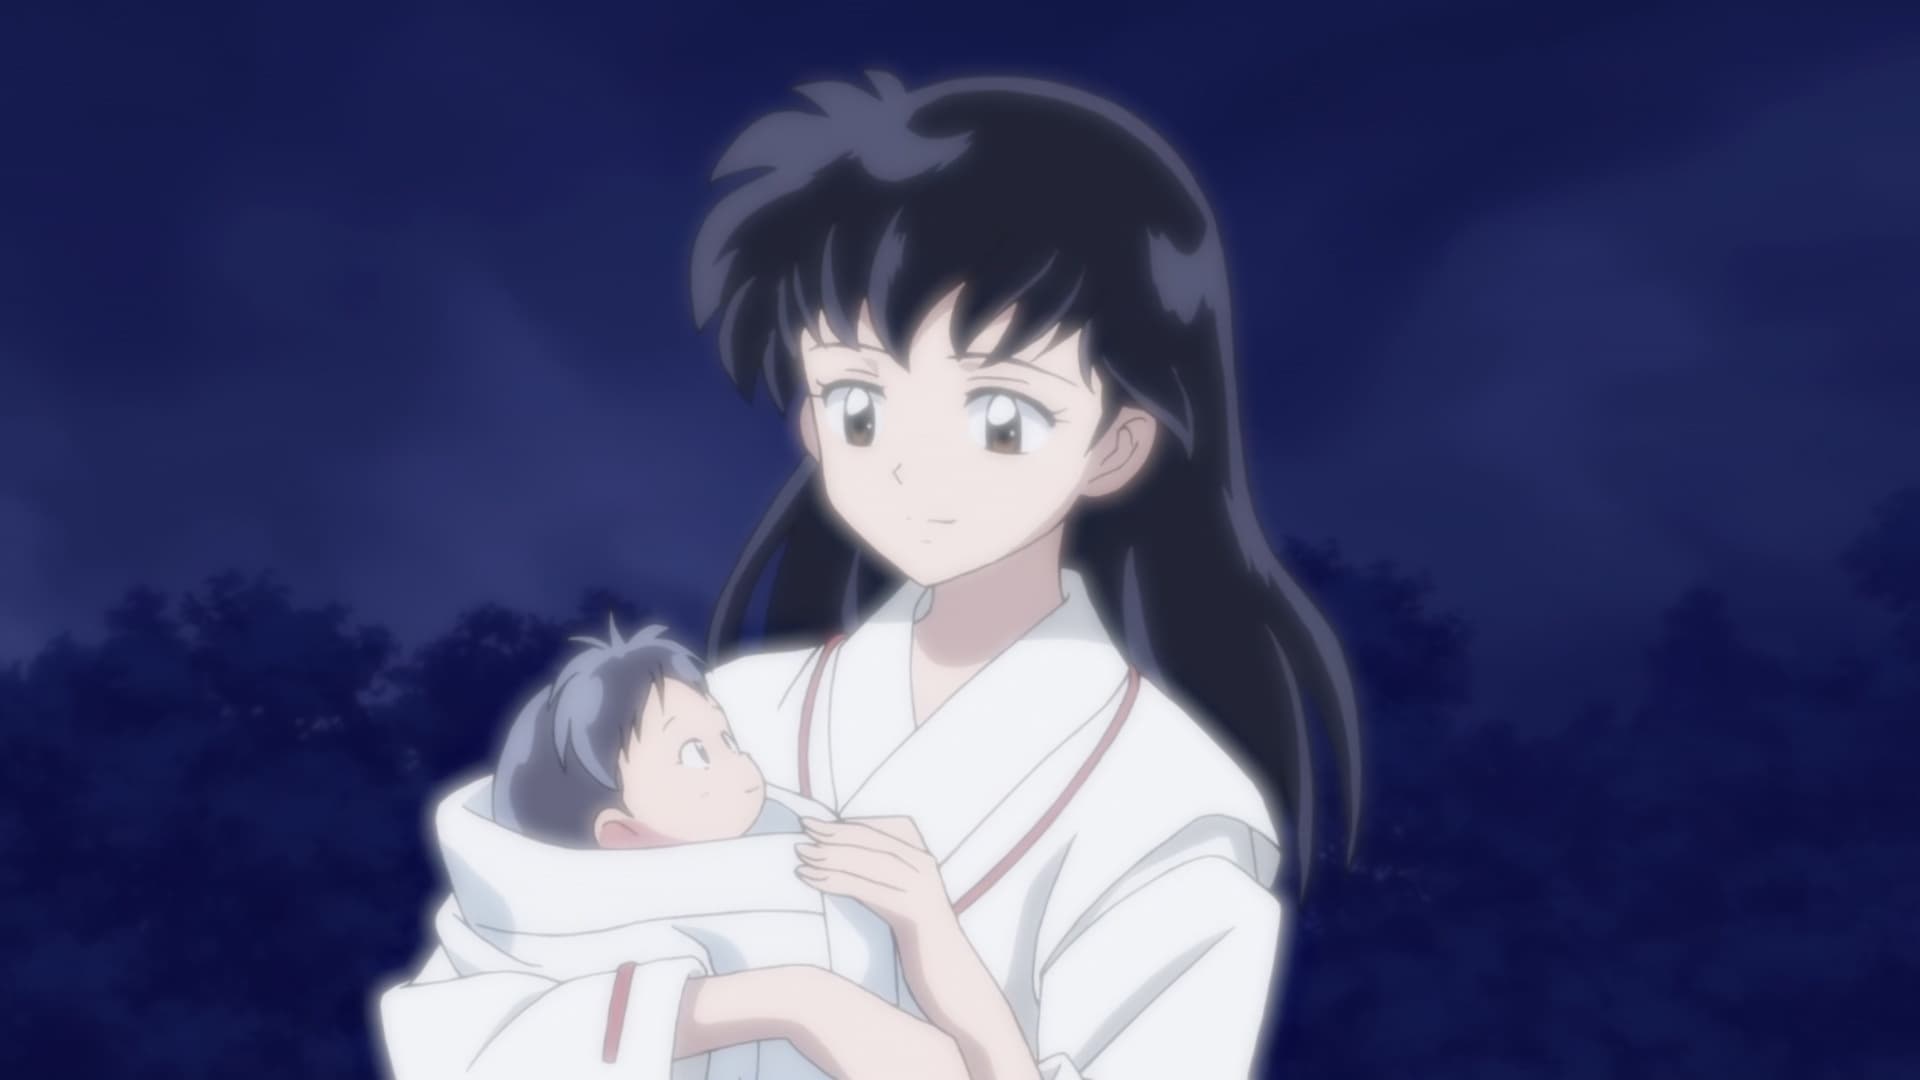 Watch Yashahime: Princess Half-Demon Episode 3 Online - The Dream Butterfly